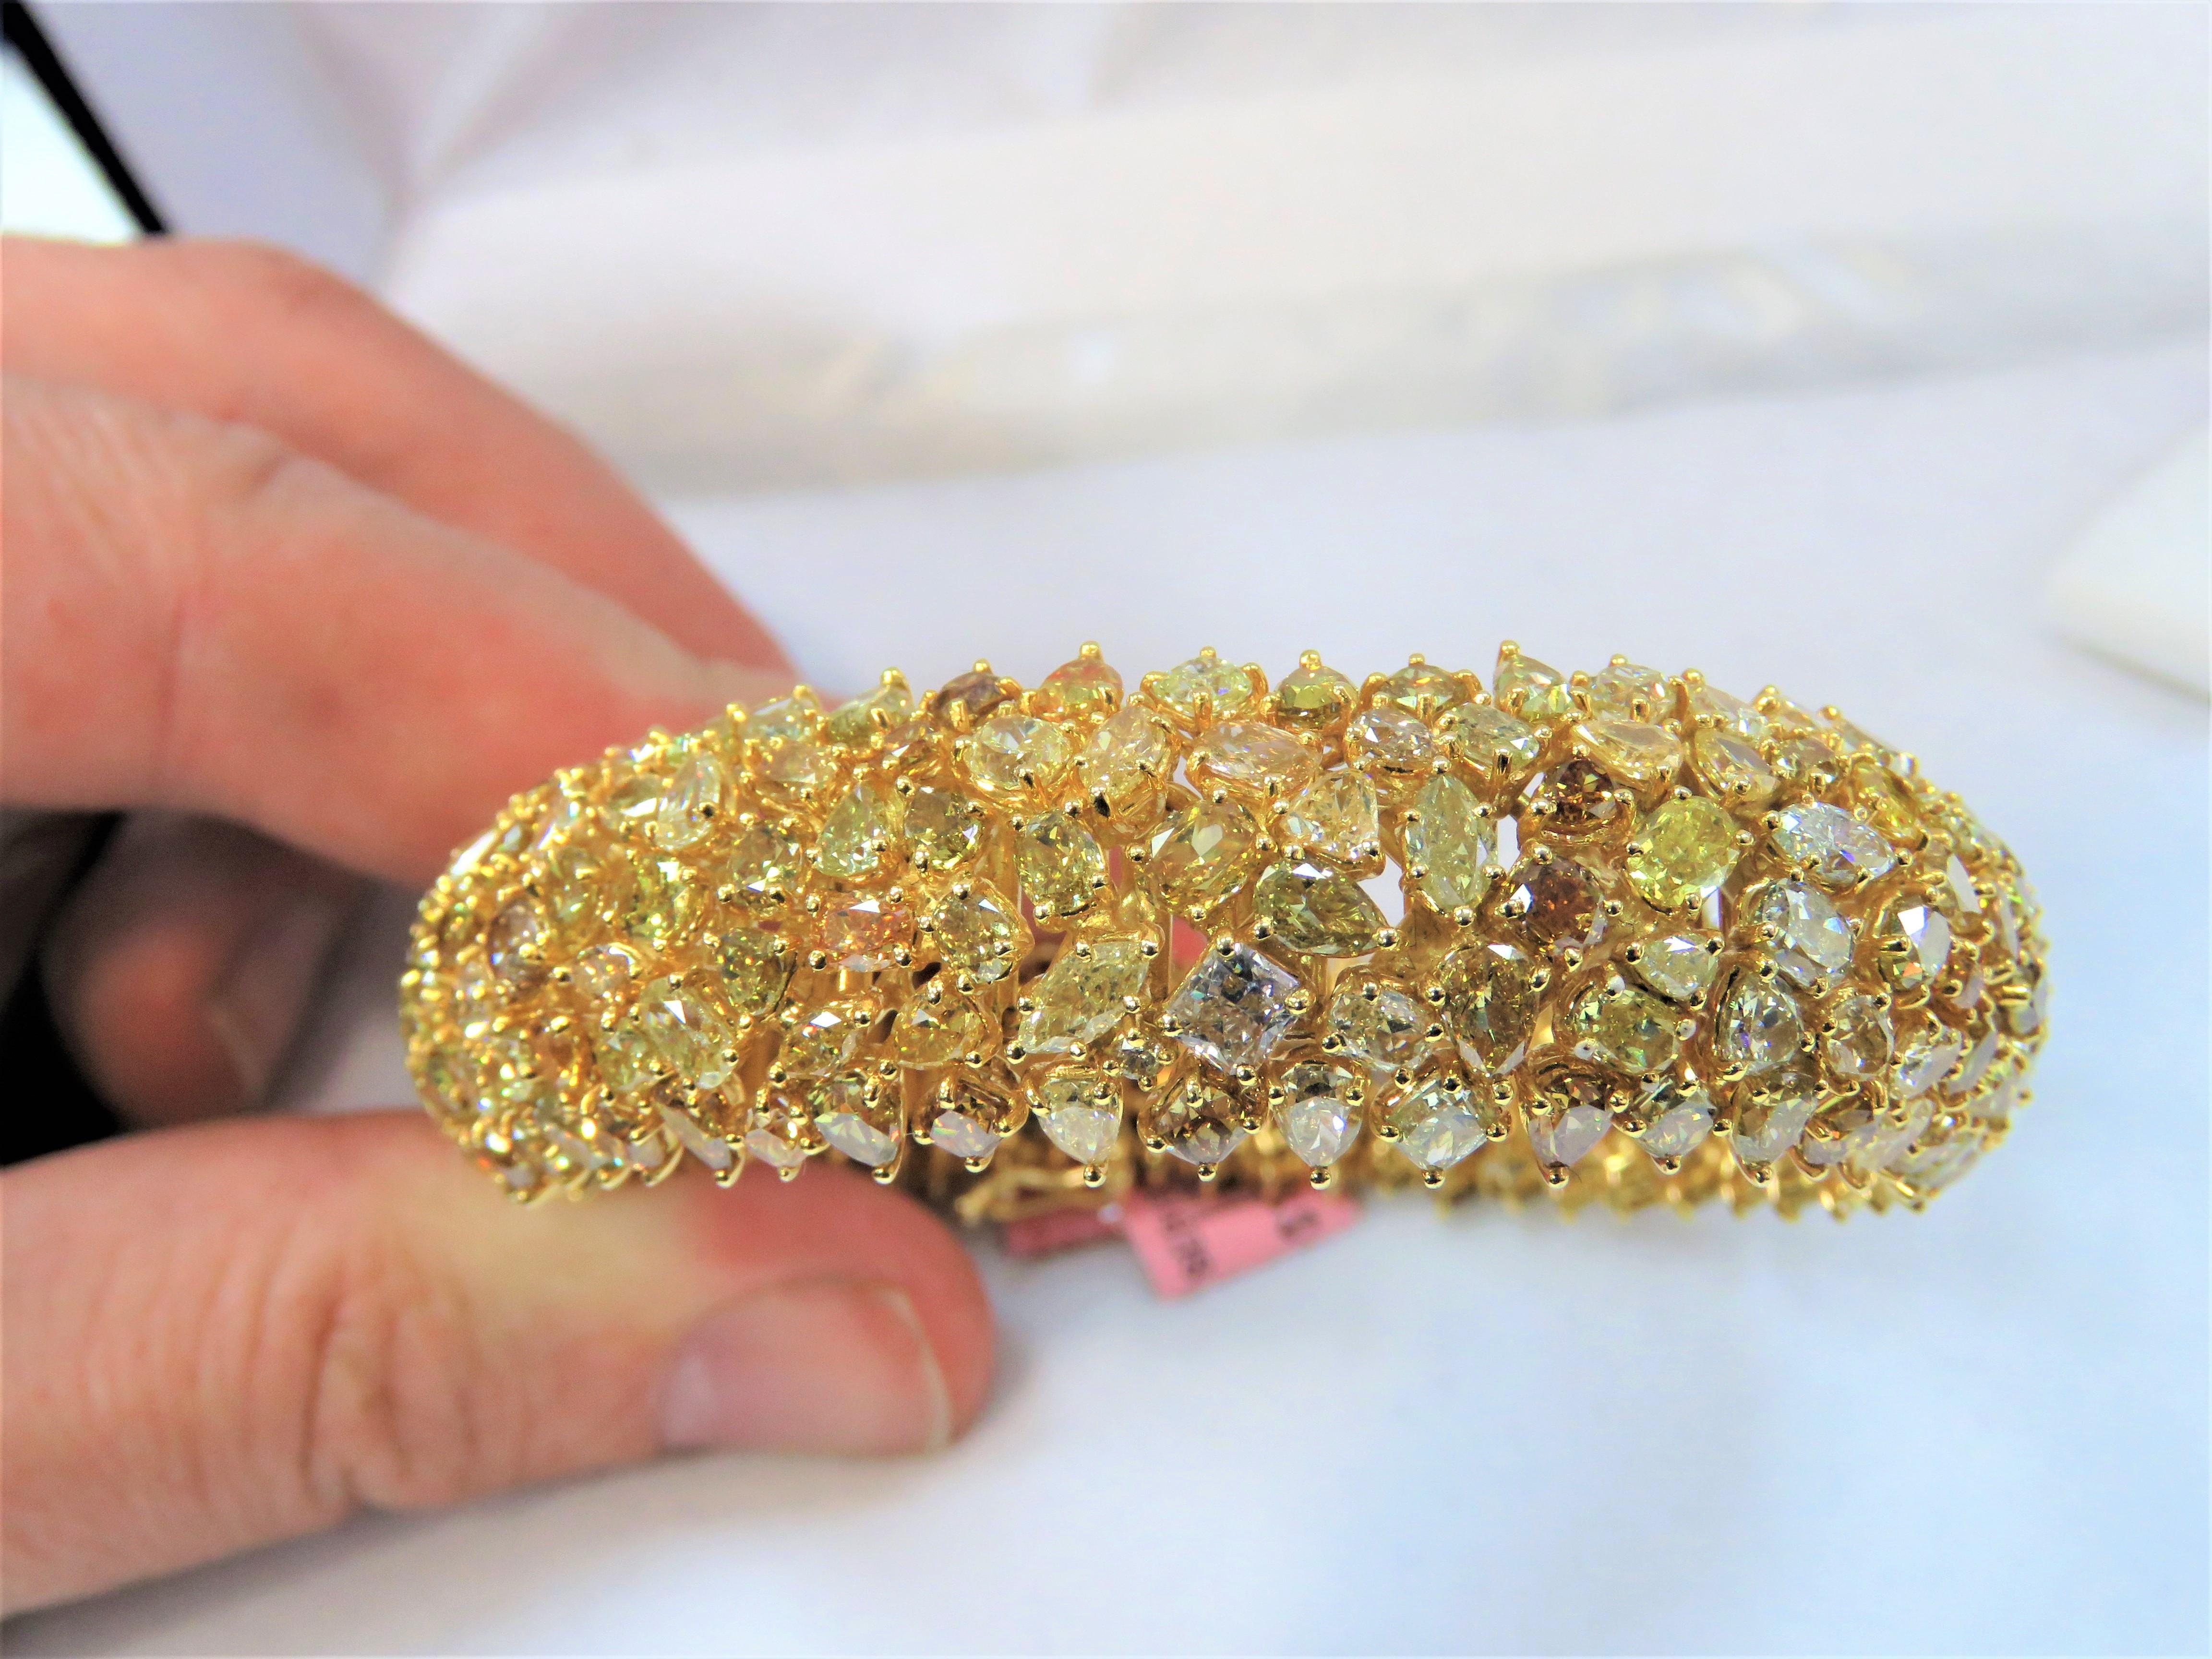 The Following Item we are offering is a Rare Important Radiant 18KT Gold Fancy Yellow Diamond Bracelet! This Magnificent Fancy Yellow Diamond Bracelet Features Pristine Cut Fancy assorted shades of Fancy Yellow Diamonds!! This Gorgeous Bracelet is a